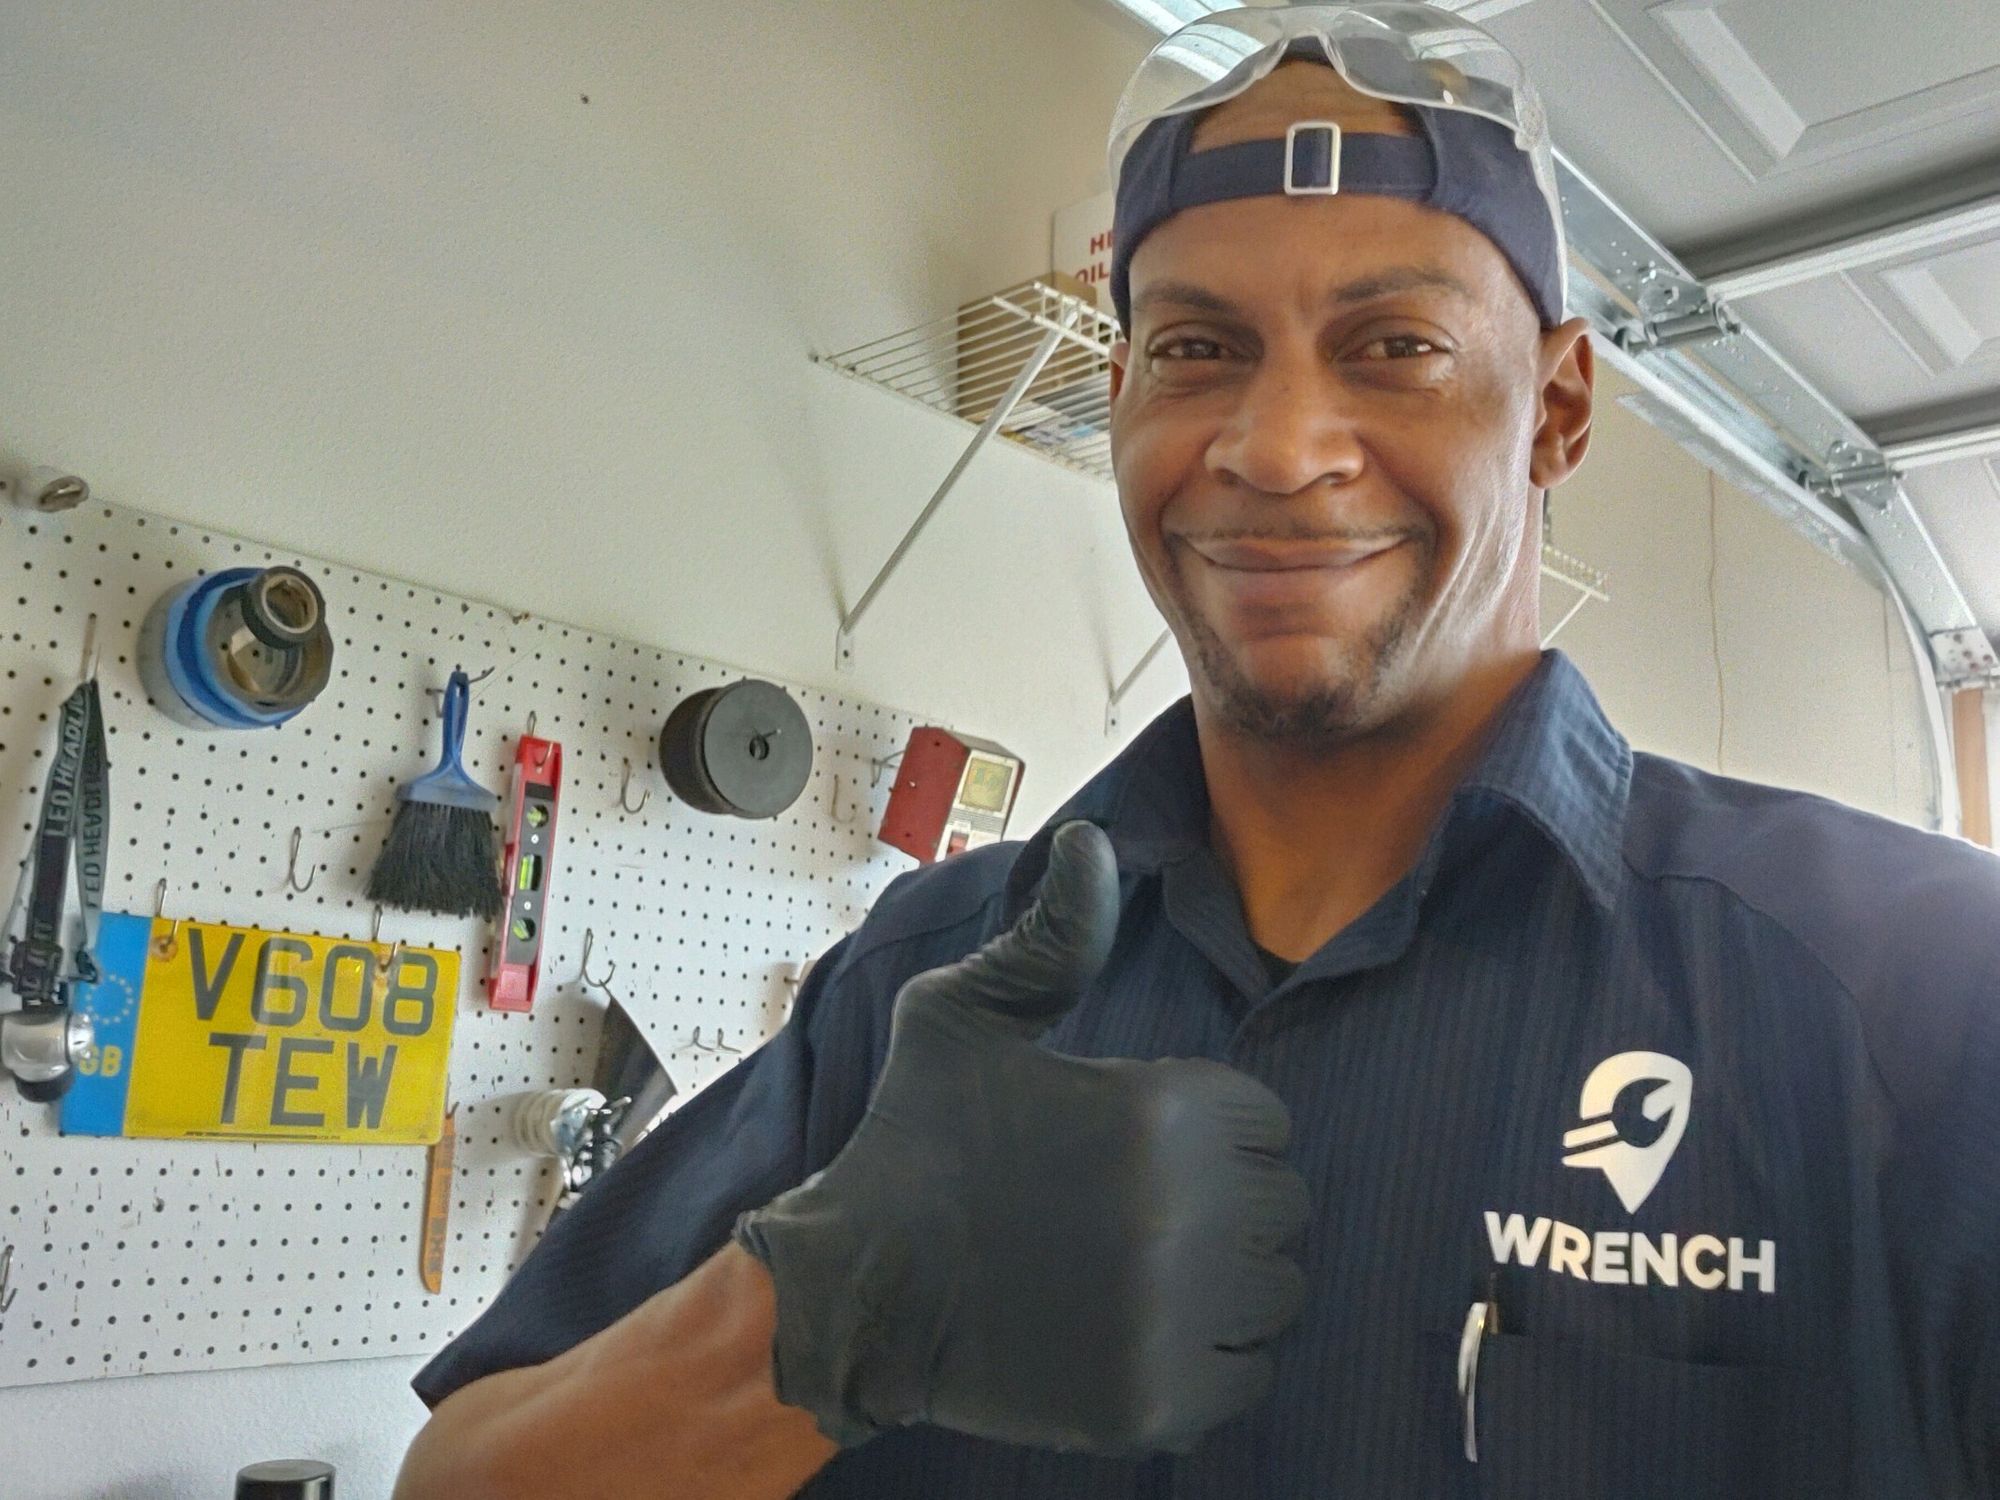 Wrench Mobile Mechanic And Auto Repair Technician In Garage